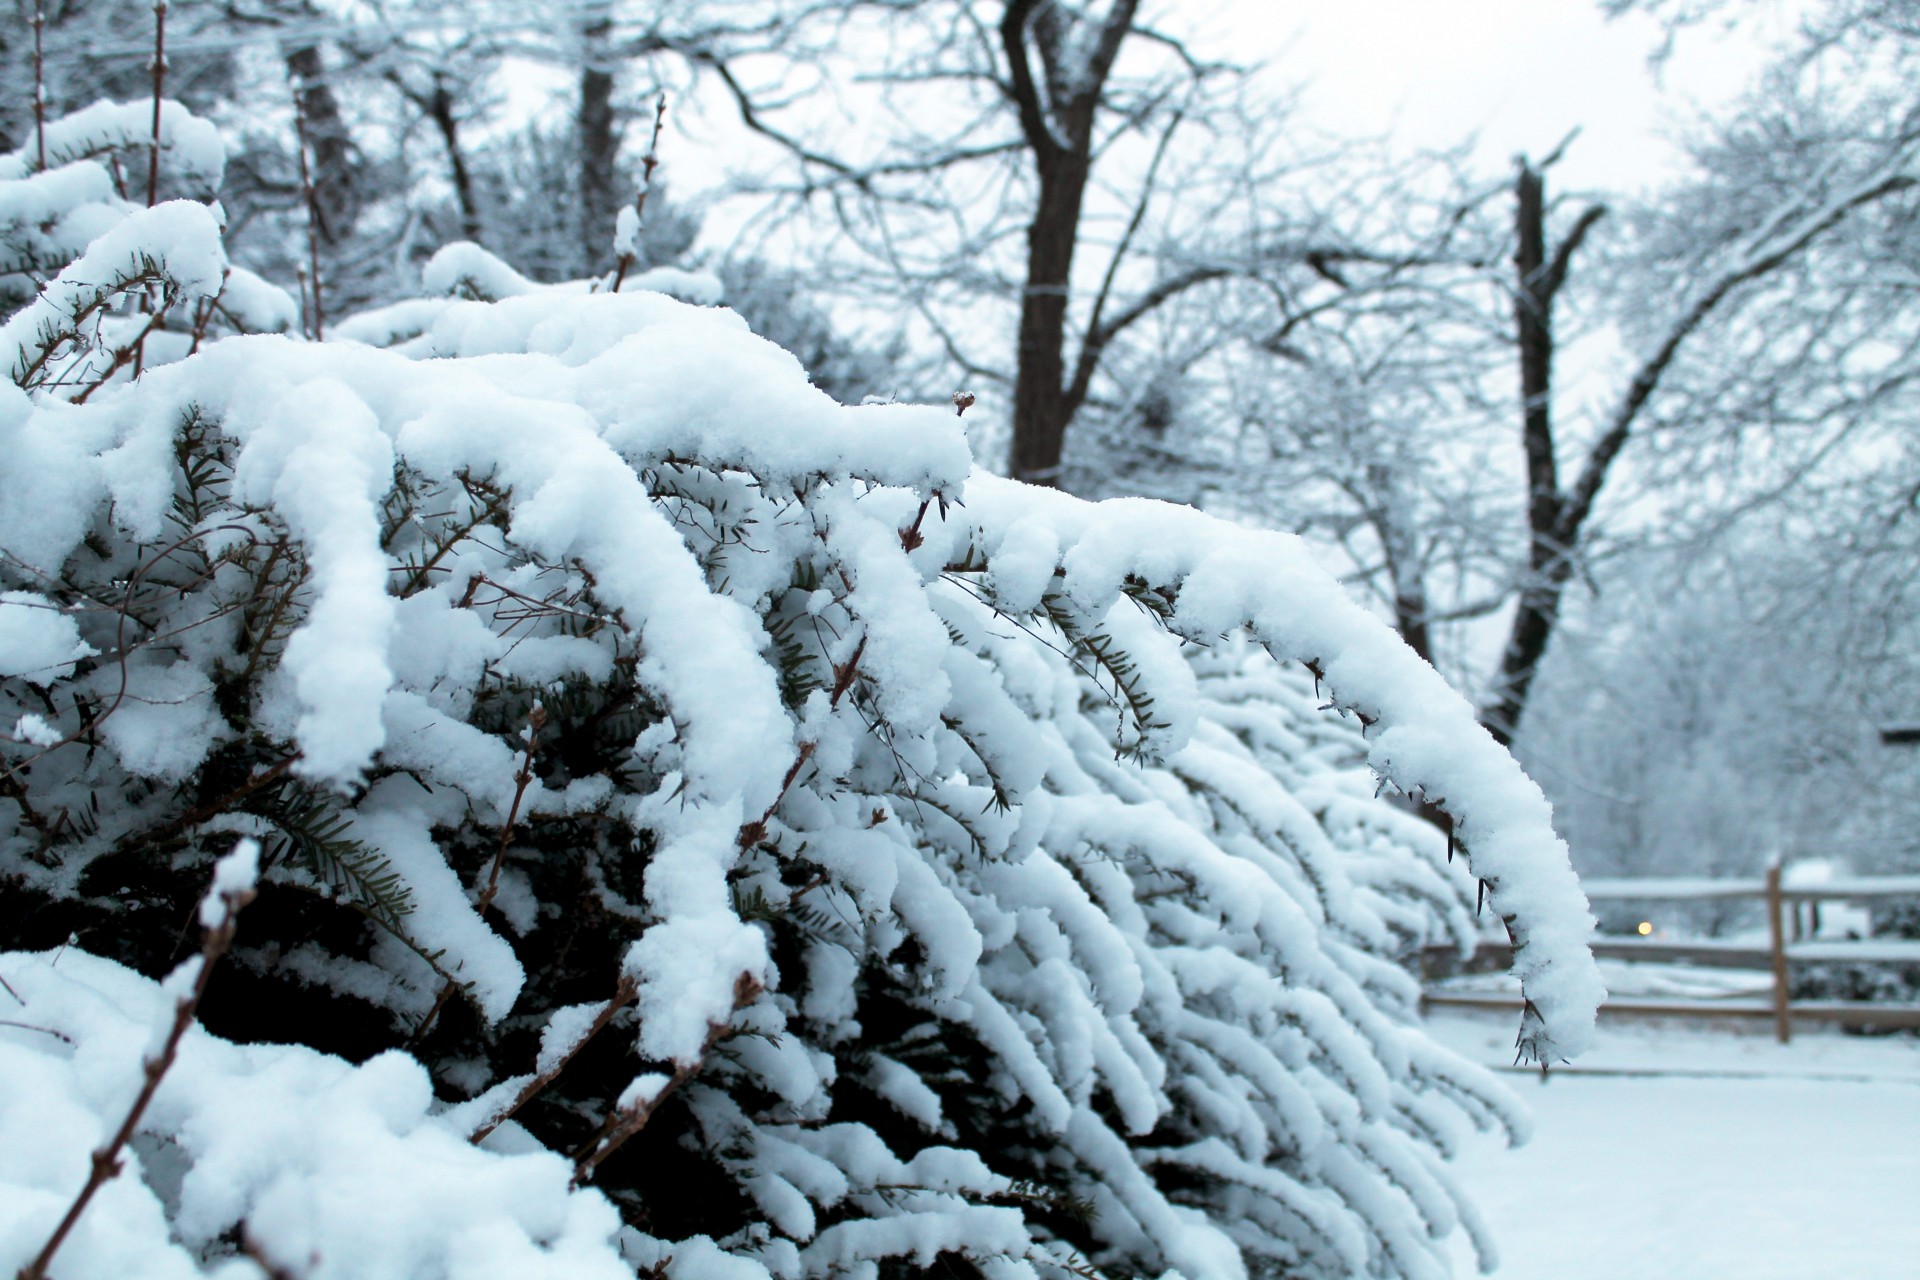 Snow Covered Branches - 02